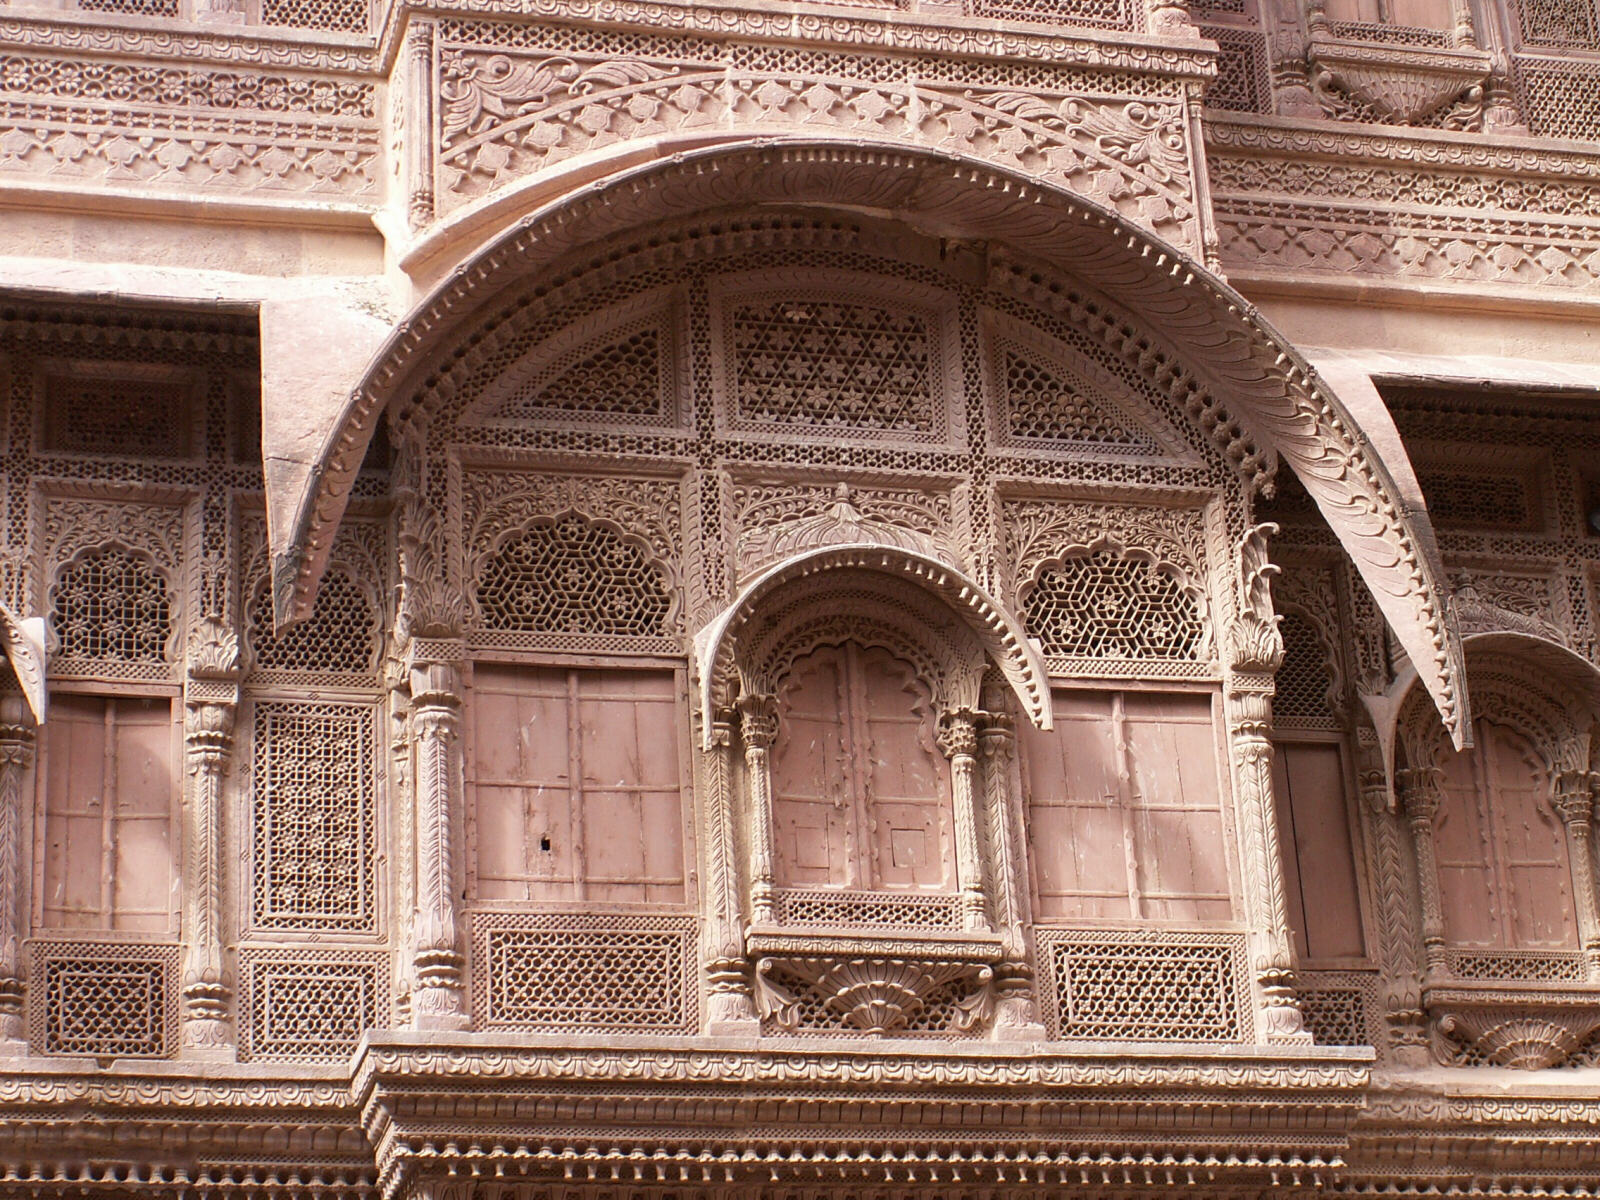 A window in a palace inside the fort in Jodhpur, Rajasthan